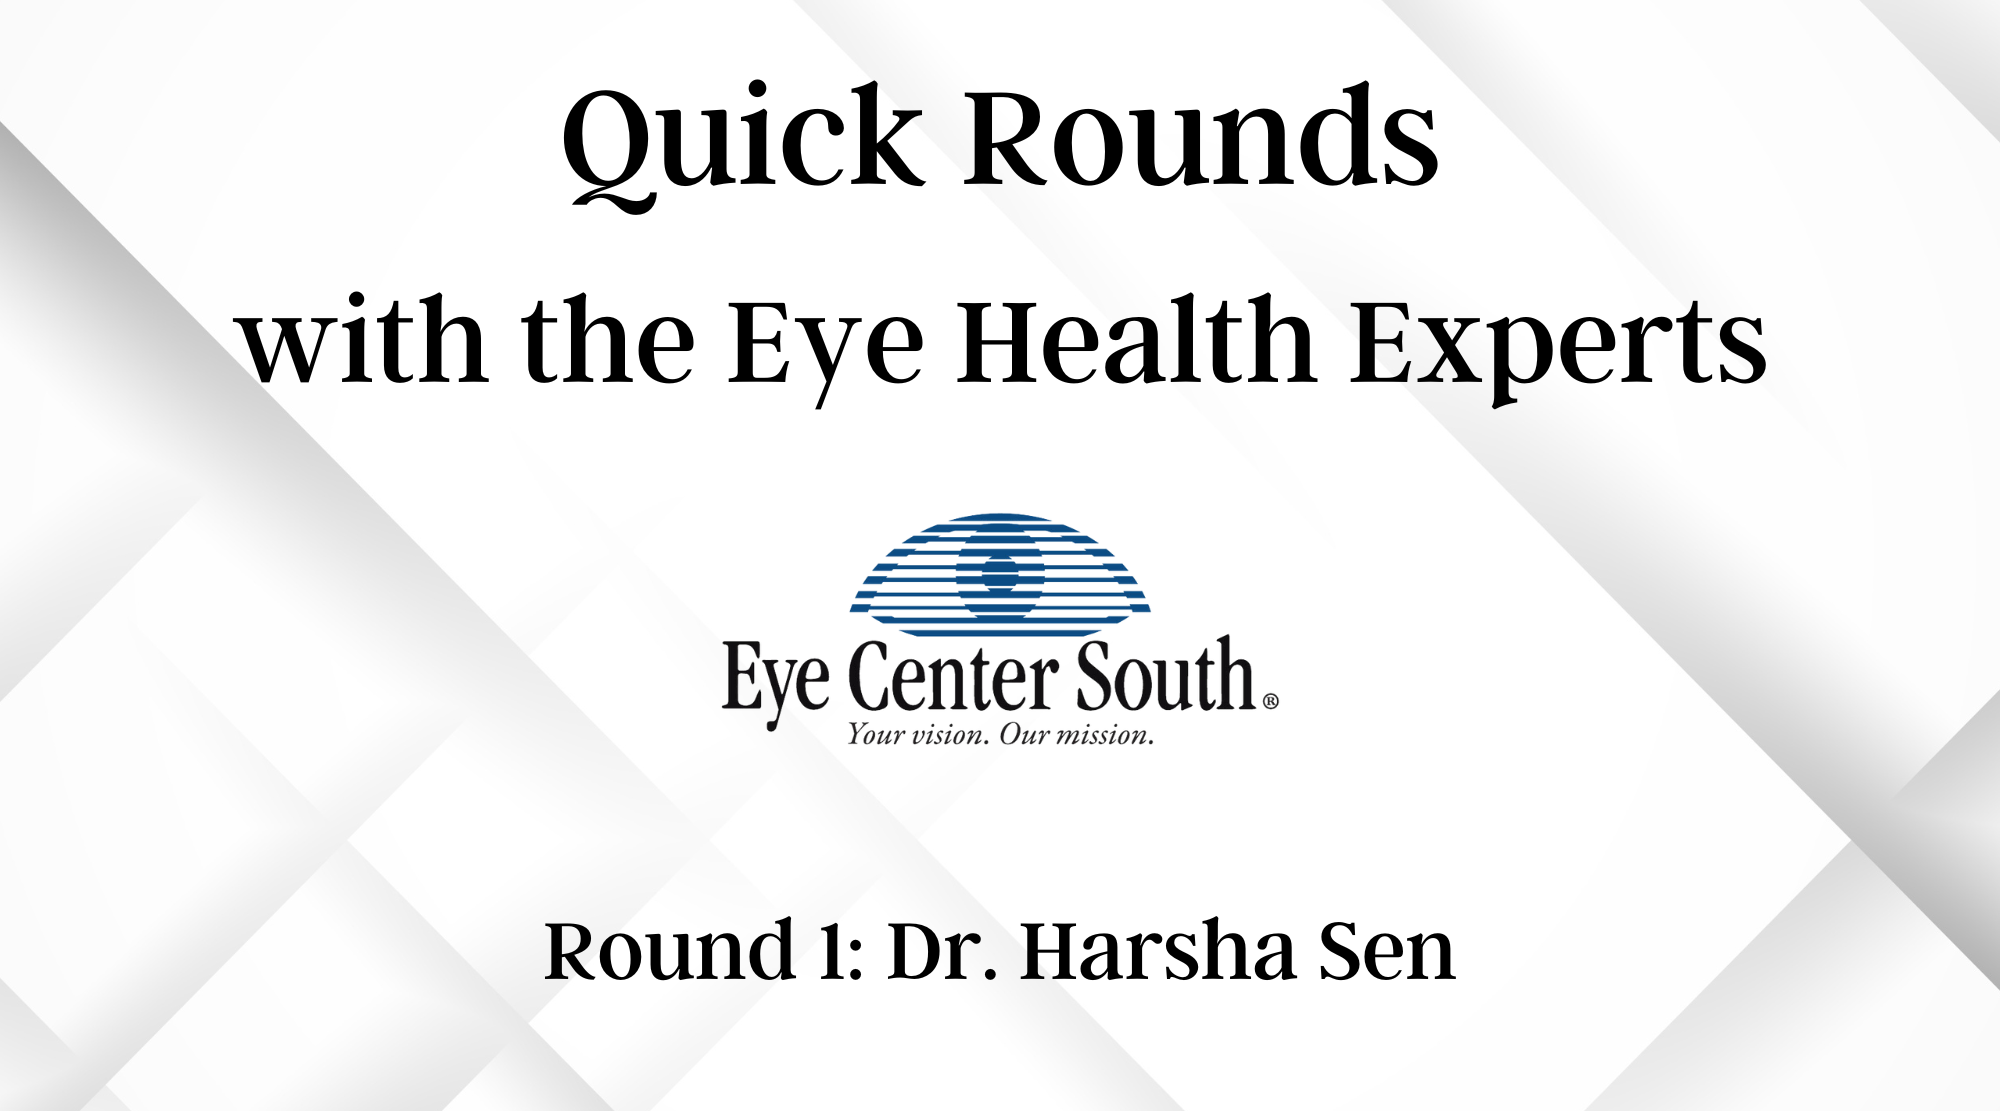 Quick Rounds with the Eye Health Experts